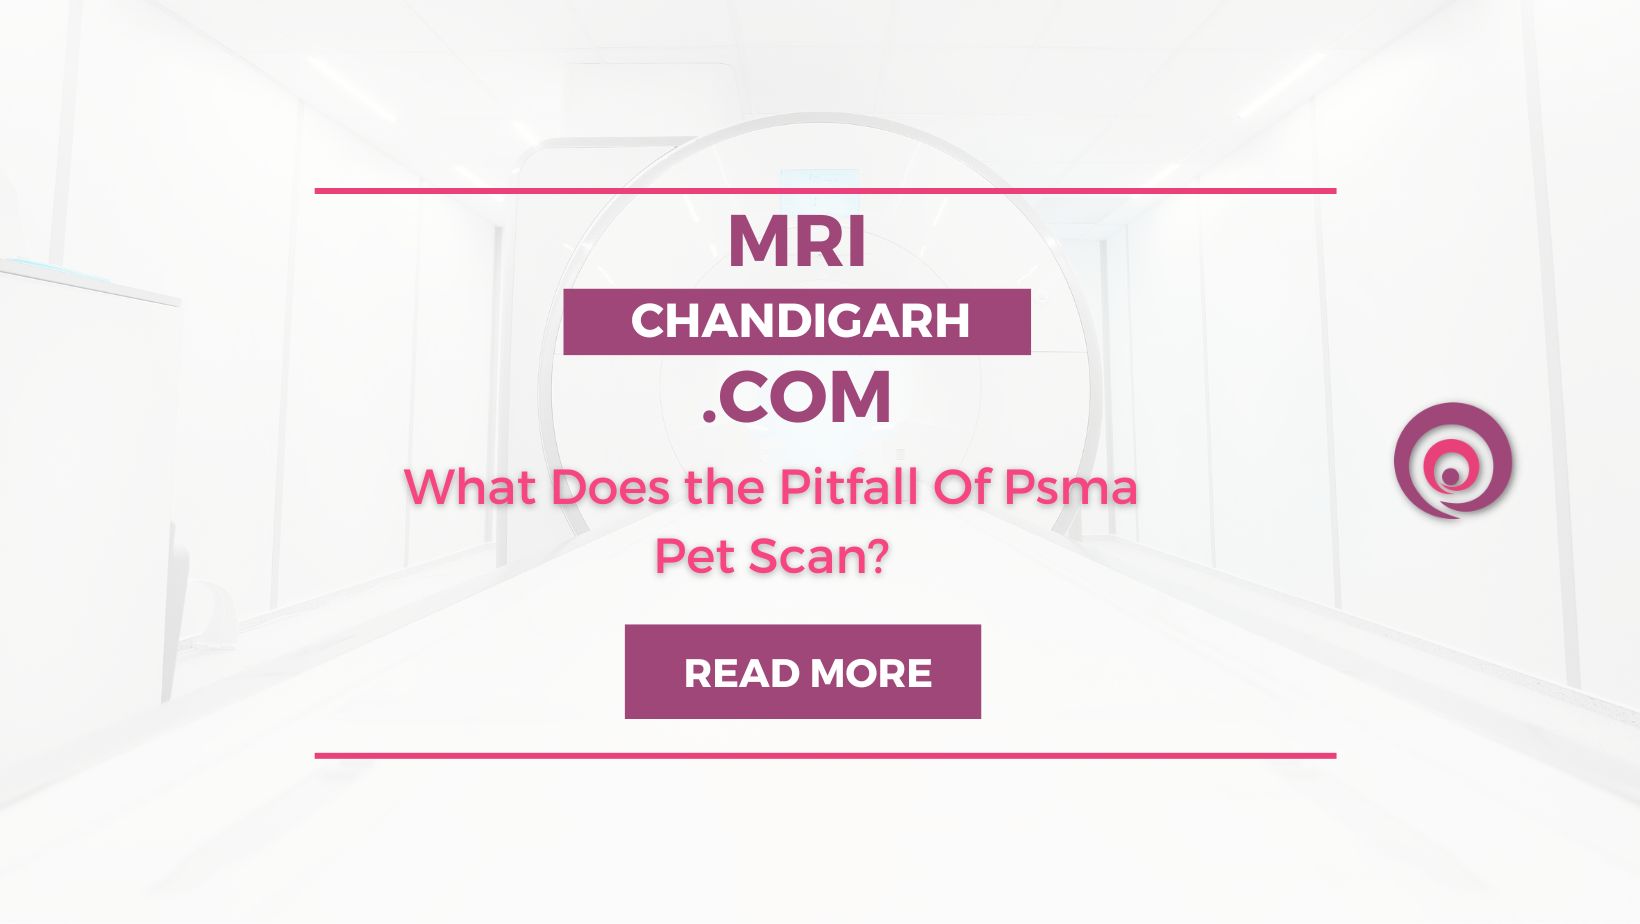 What Does the Pitfall Of Psma Pet Scan?